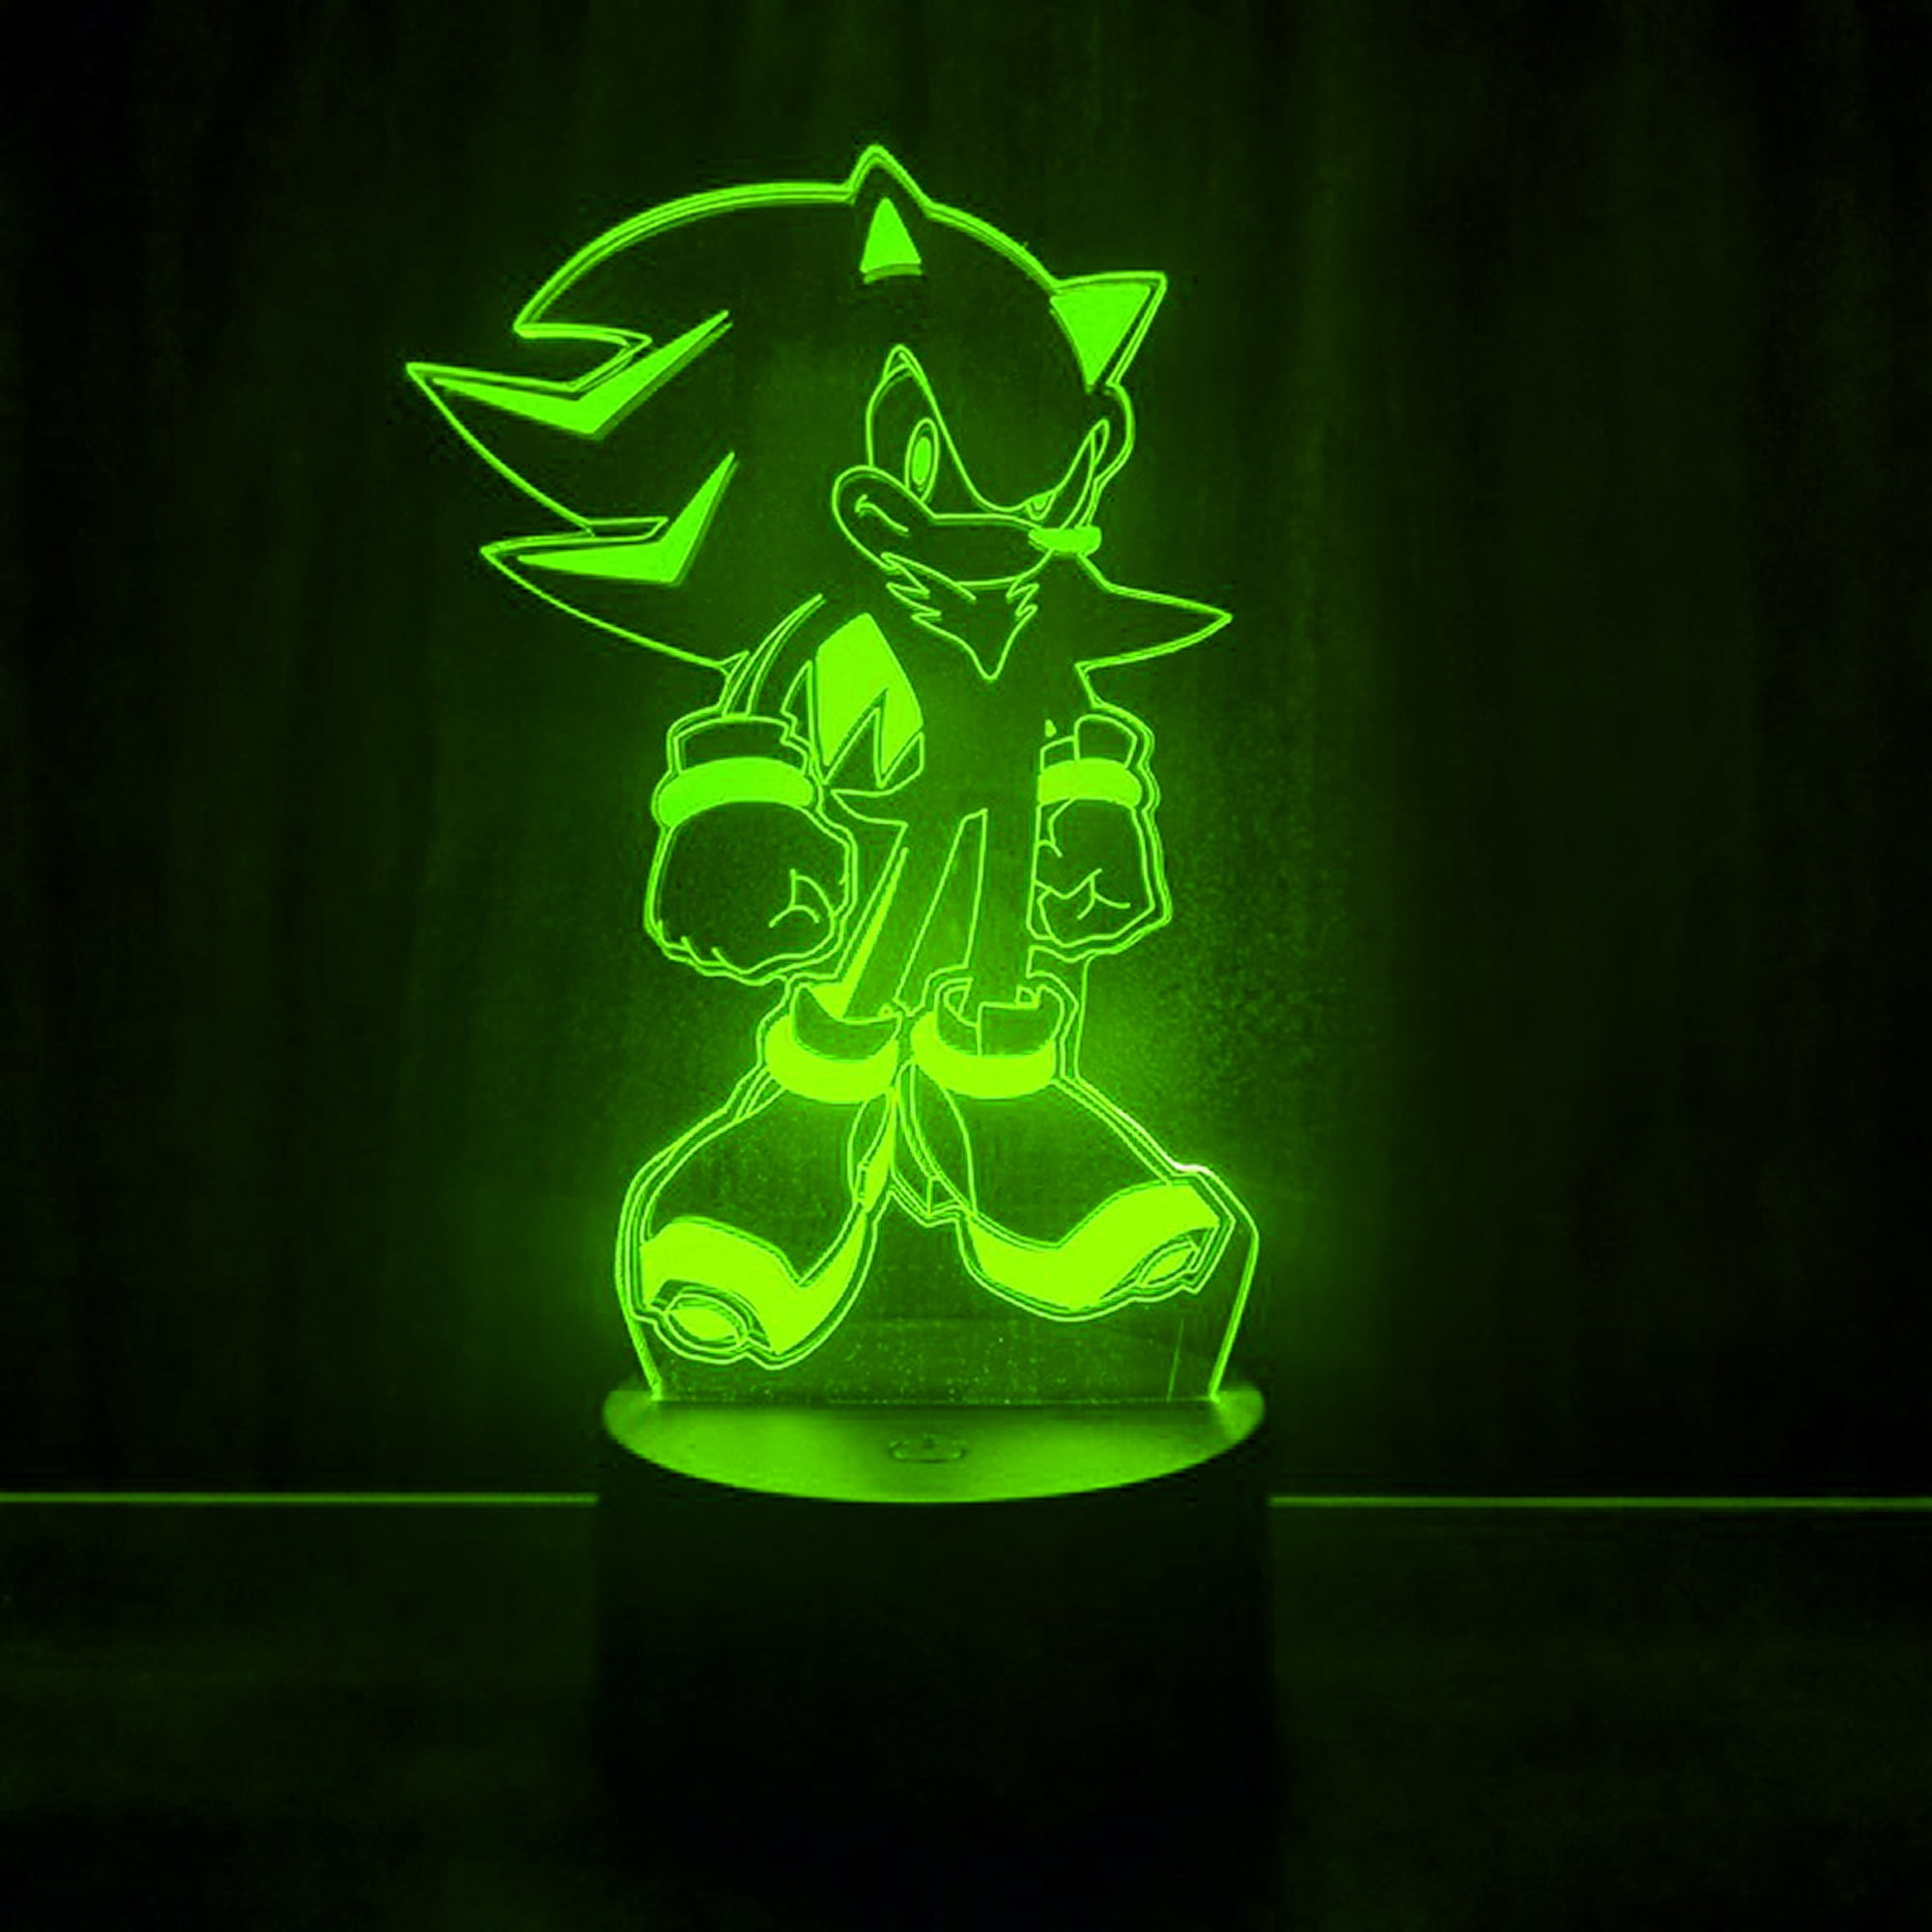 Details about   Sonic The Hedgehog 3D LED Night Light Touch Table Desk Lamp Xmas Bedroom Decor 